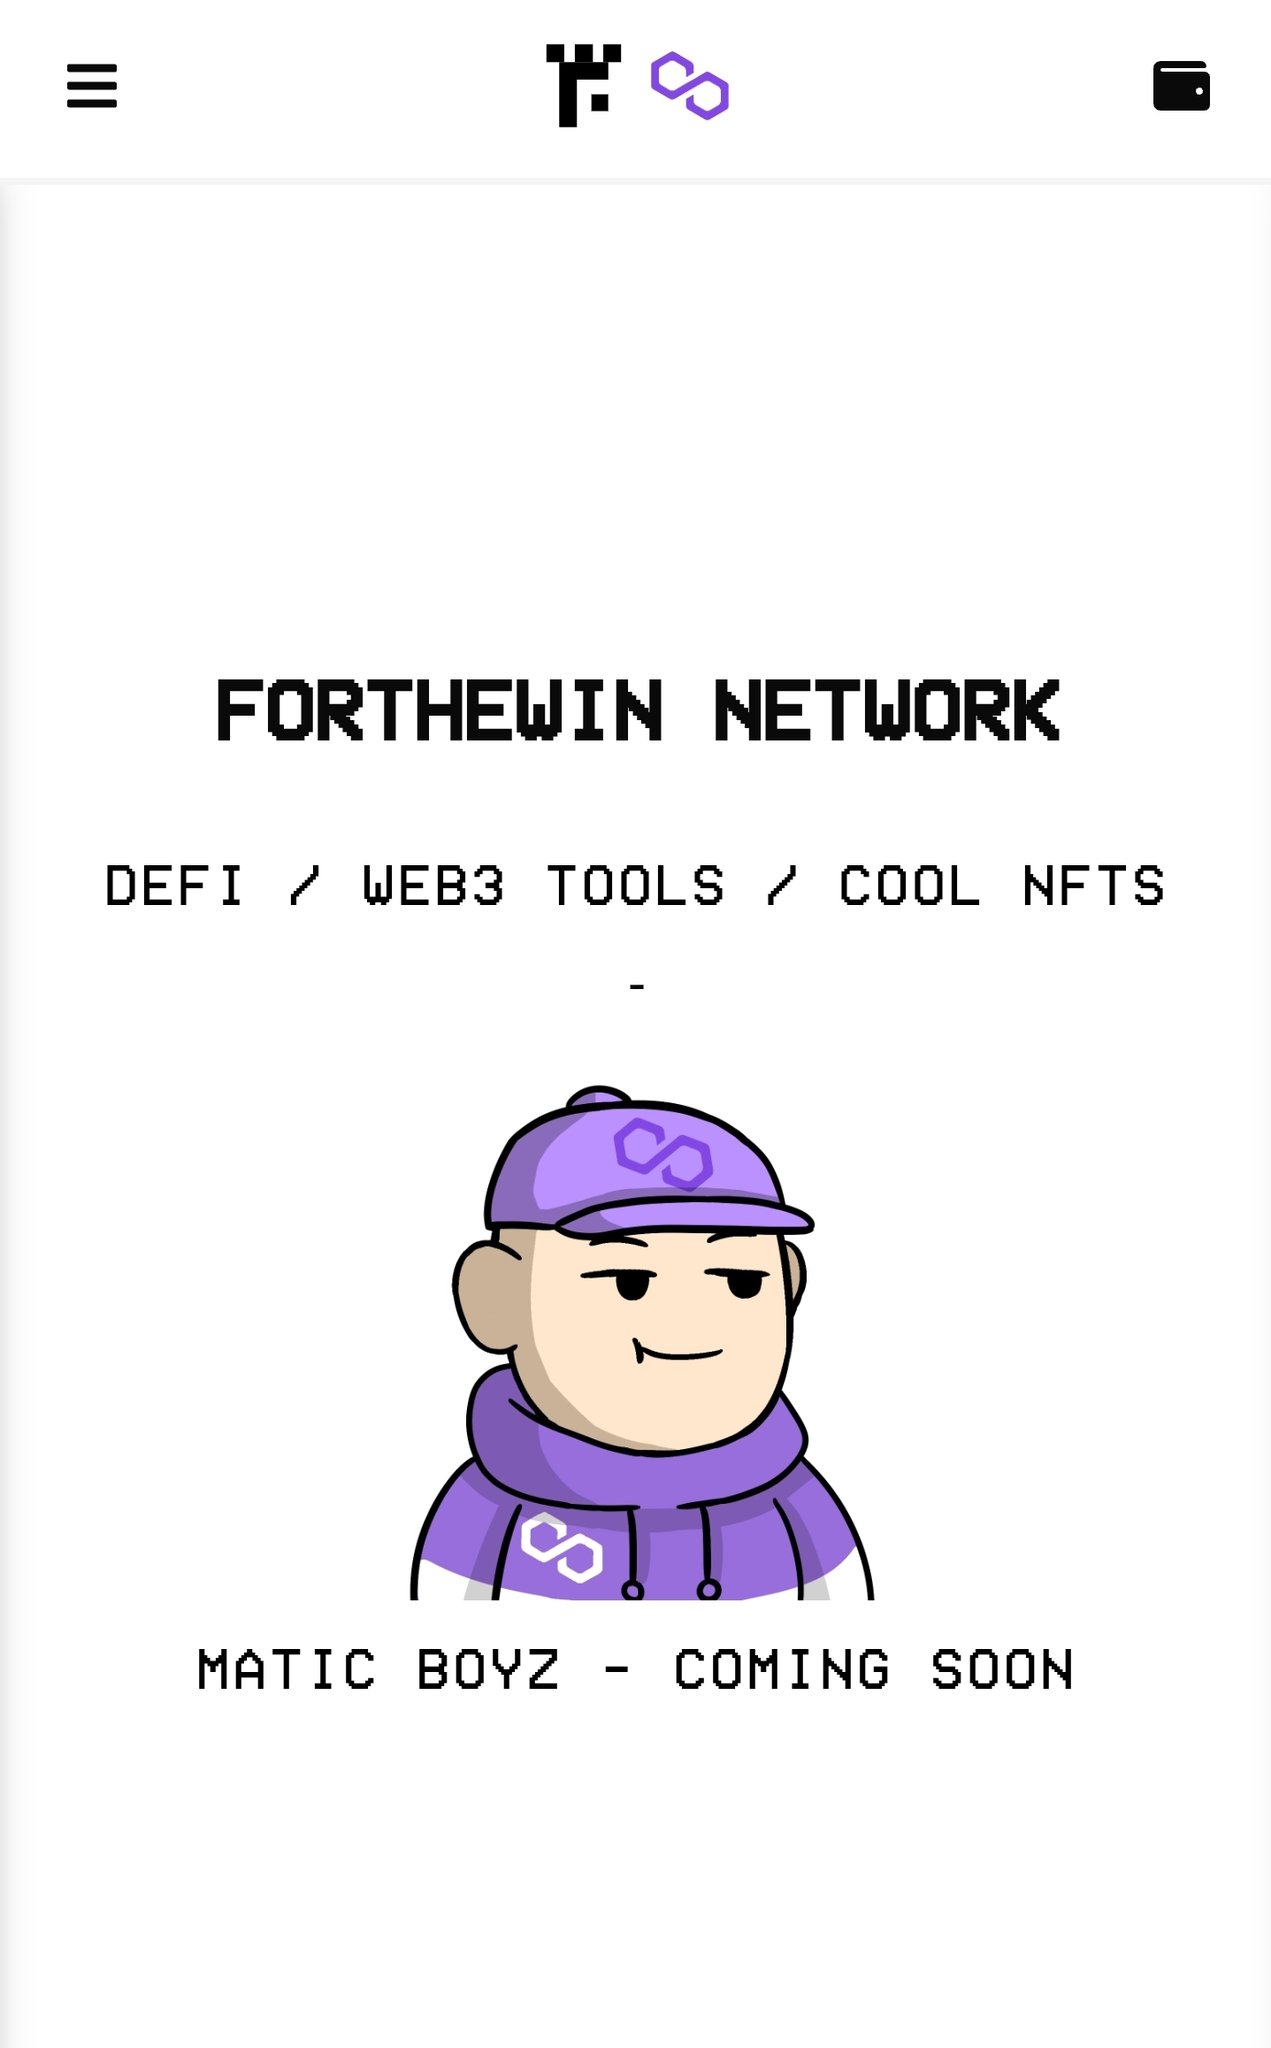 Forthewin Network (@N3_FTW_NETWORK) / X